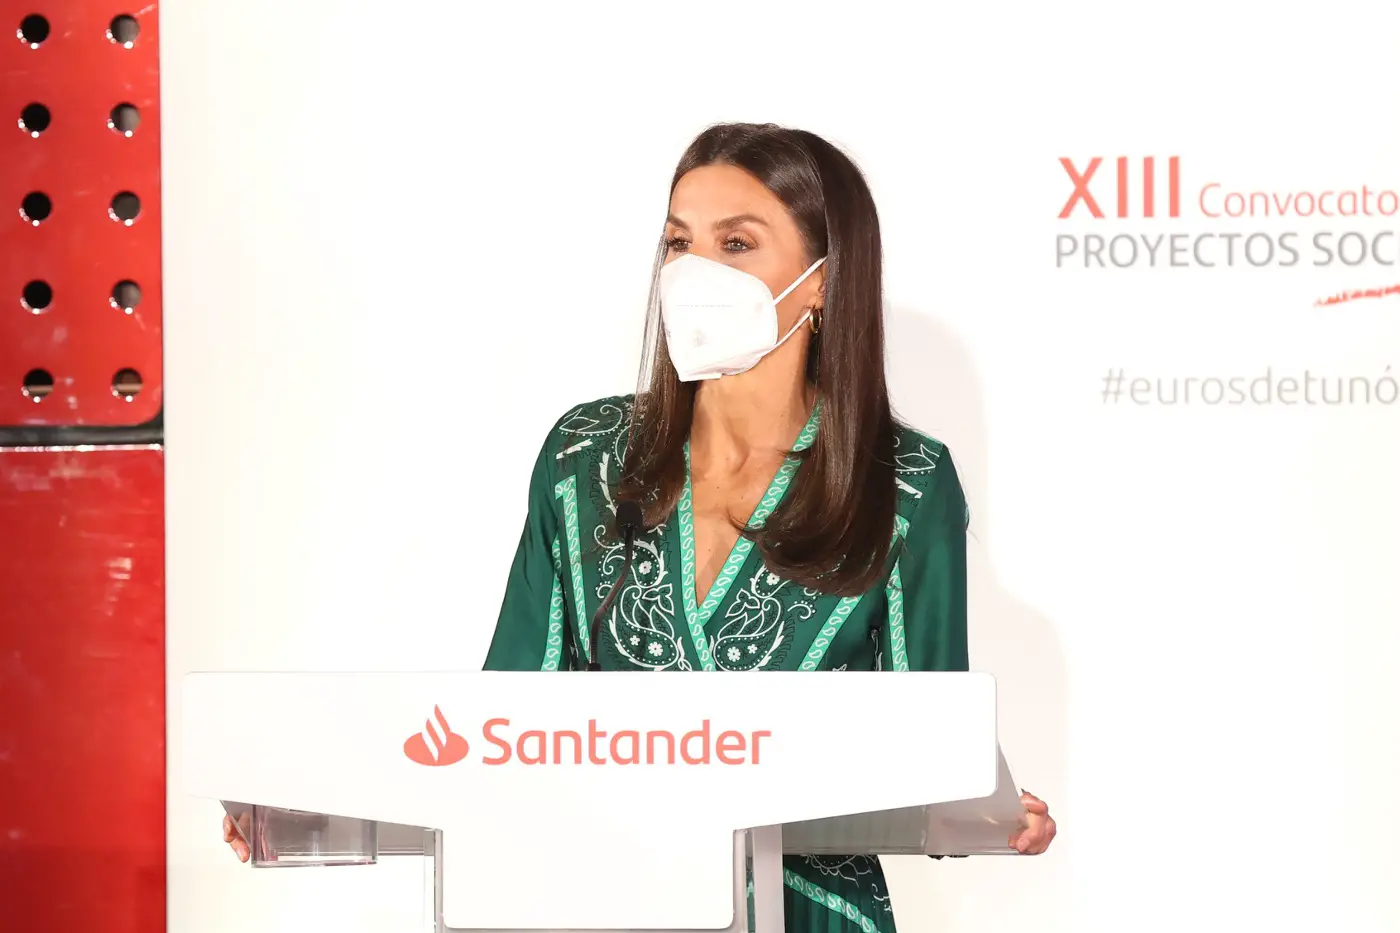 Queen Letizia attended the XIII Annual Call for Banco Santander Social Projects